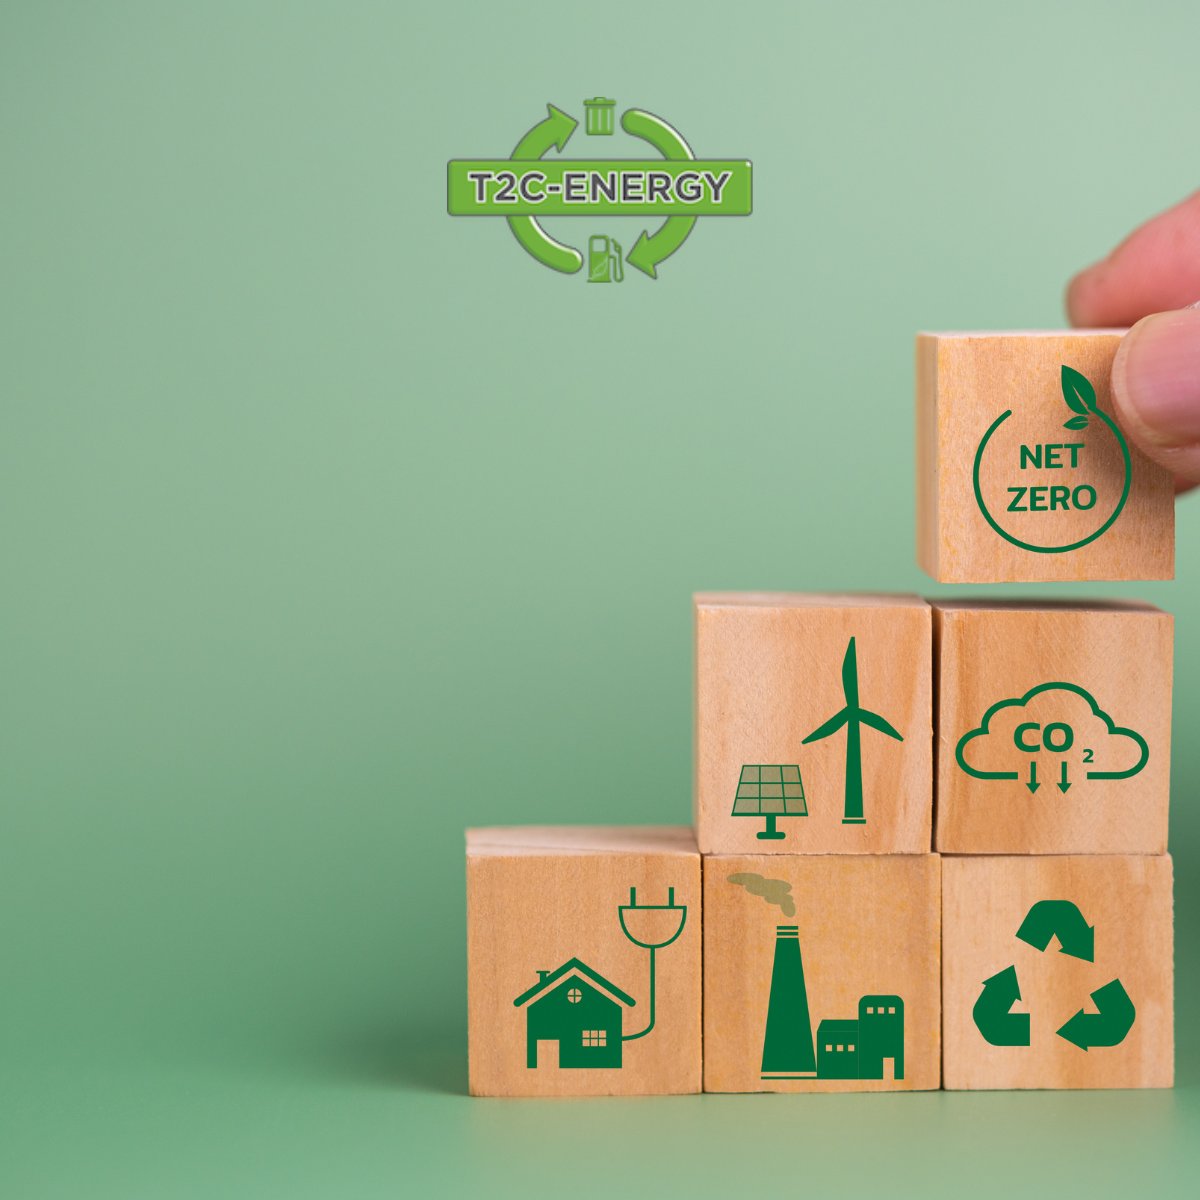 It's time to stack the fundamentals of renewable energy.
At T2C Energy, we are a building block of energy that does not harm the environment.

Learn more about us: t2cenergy.com

#greenenergy #wastetofuel